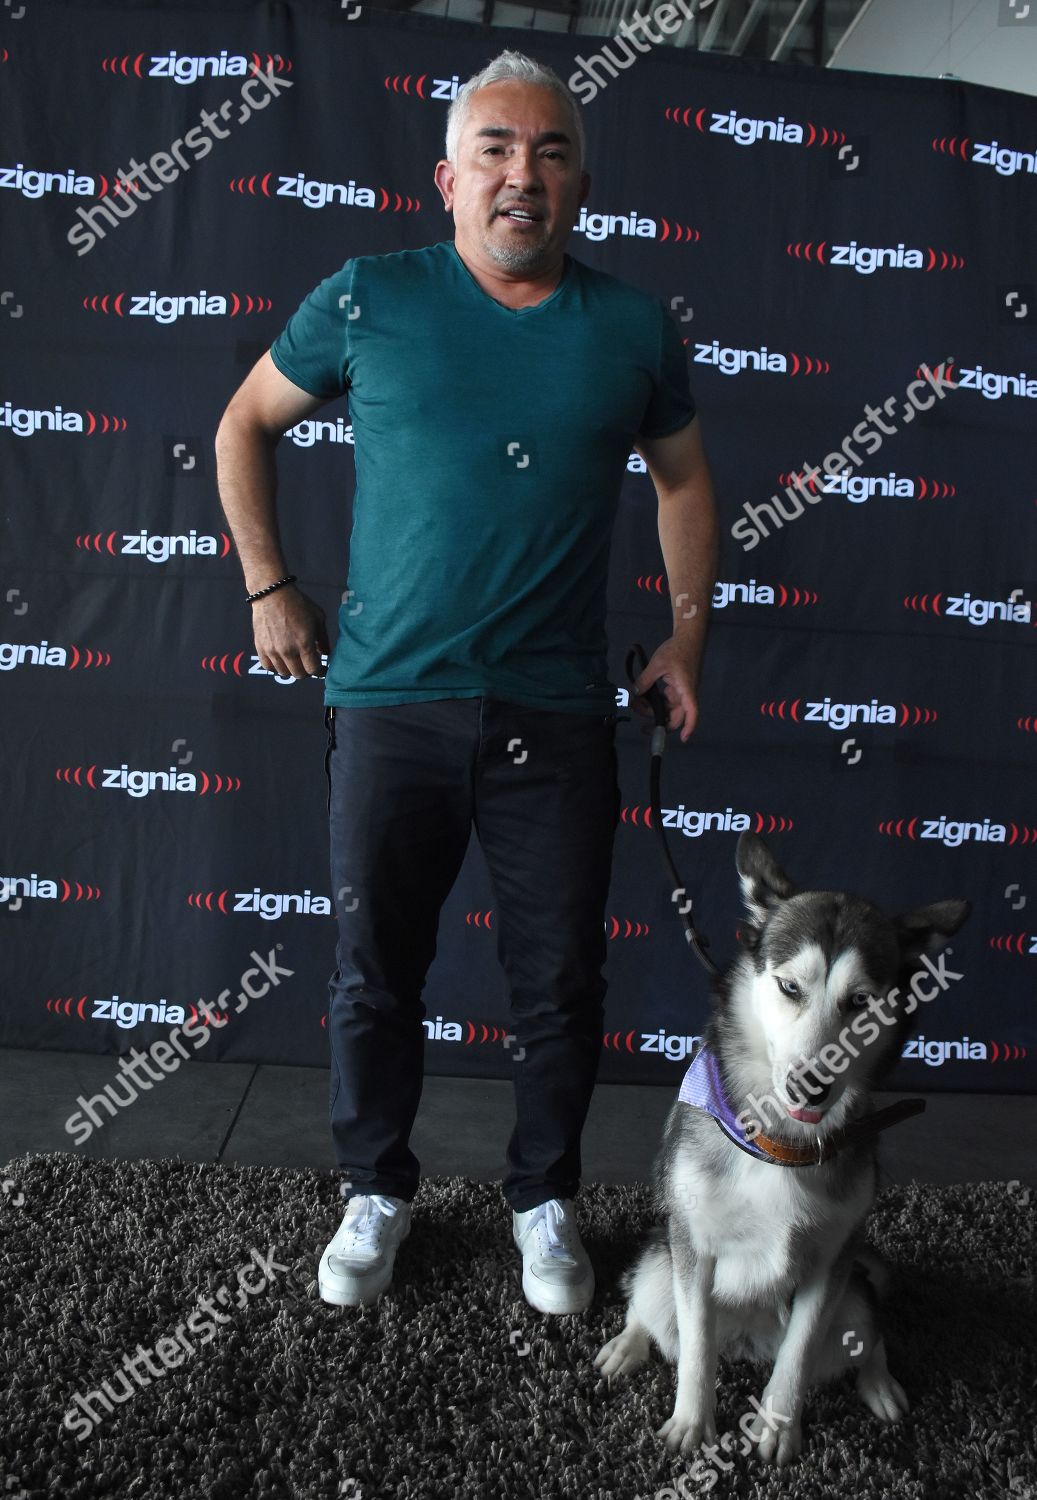 ¿Cuánto mide César Millán? Real height Cesar-millan-once-upon-dog-tour-2019-press-conference-mexico-city-mexico-shutterstock-editorial-10188805d